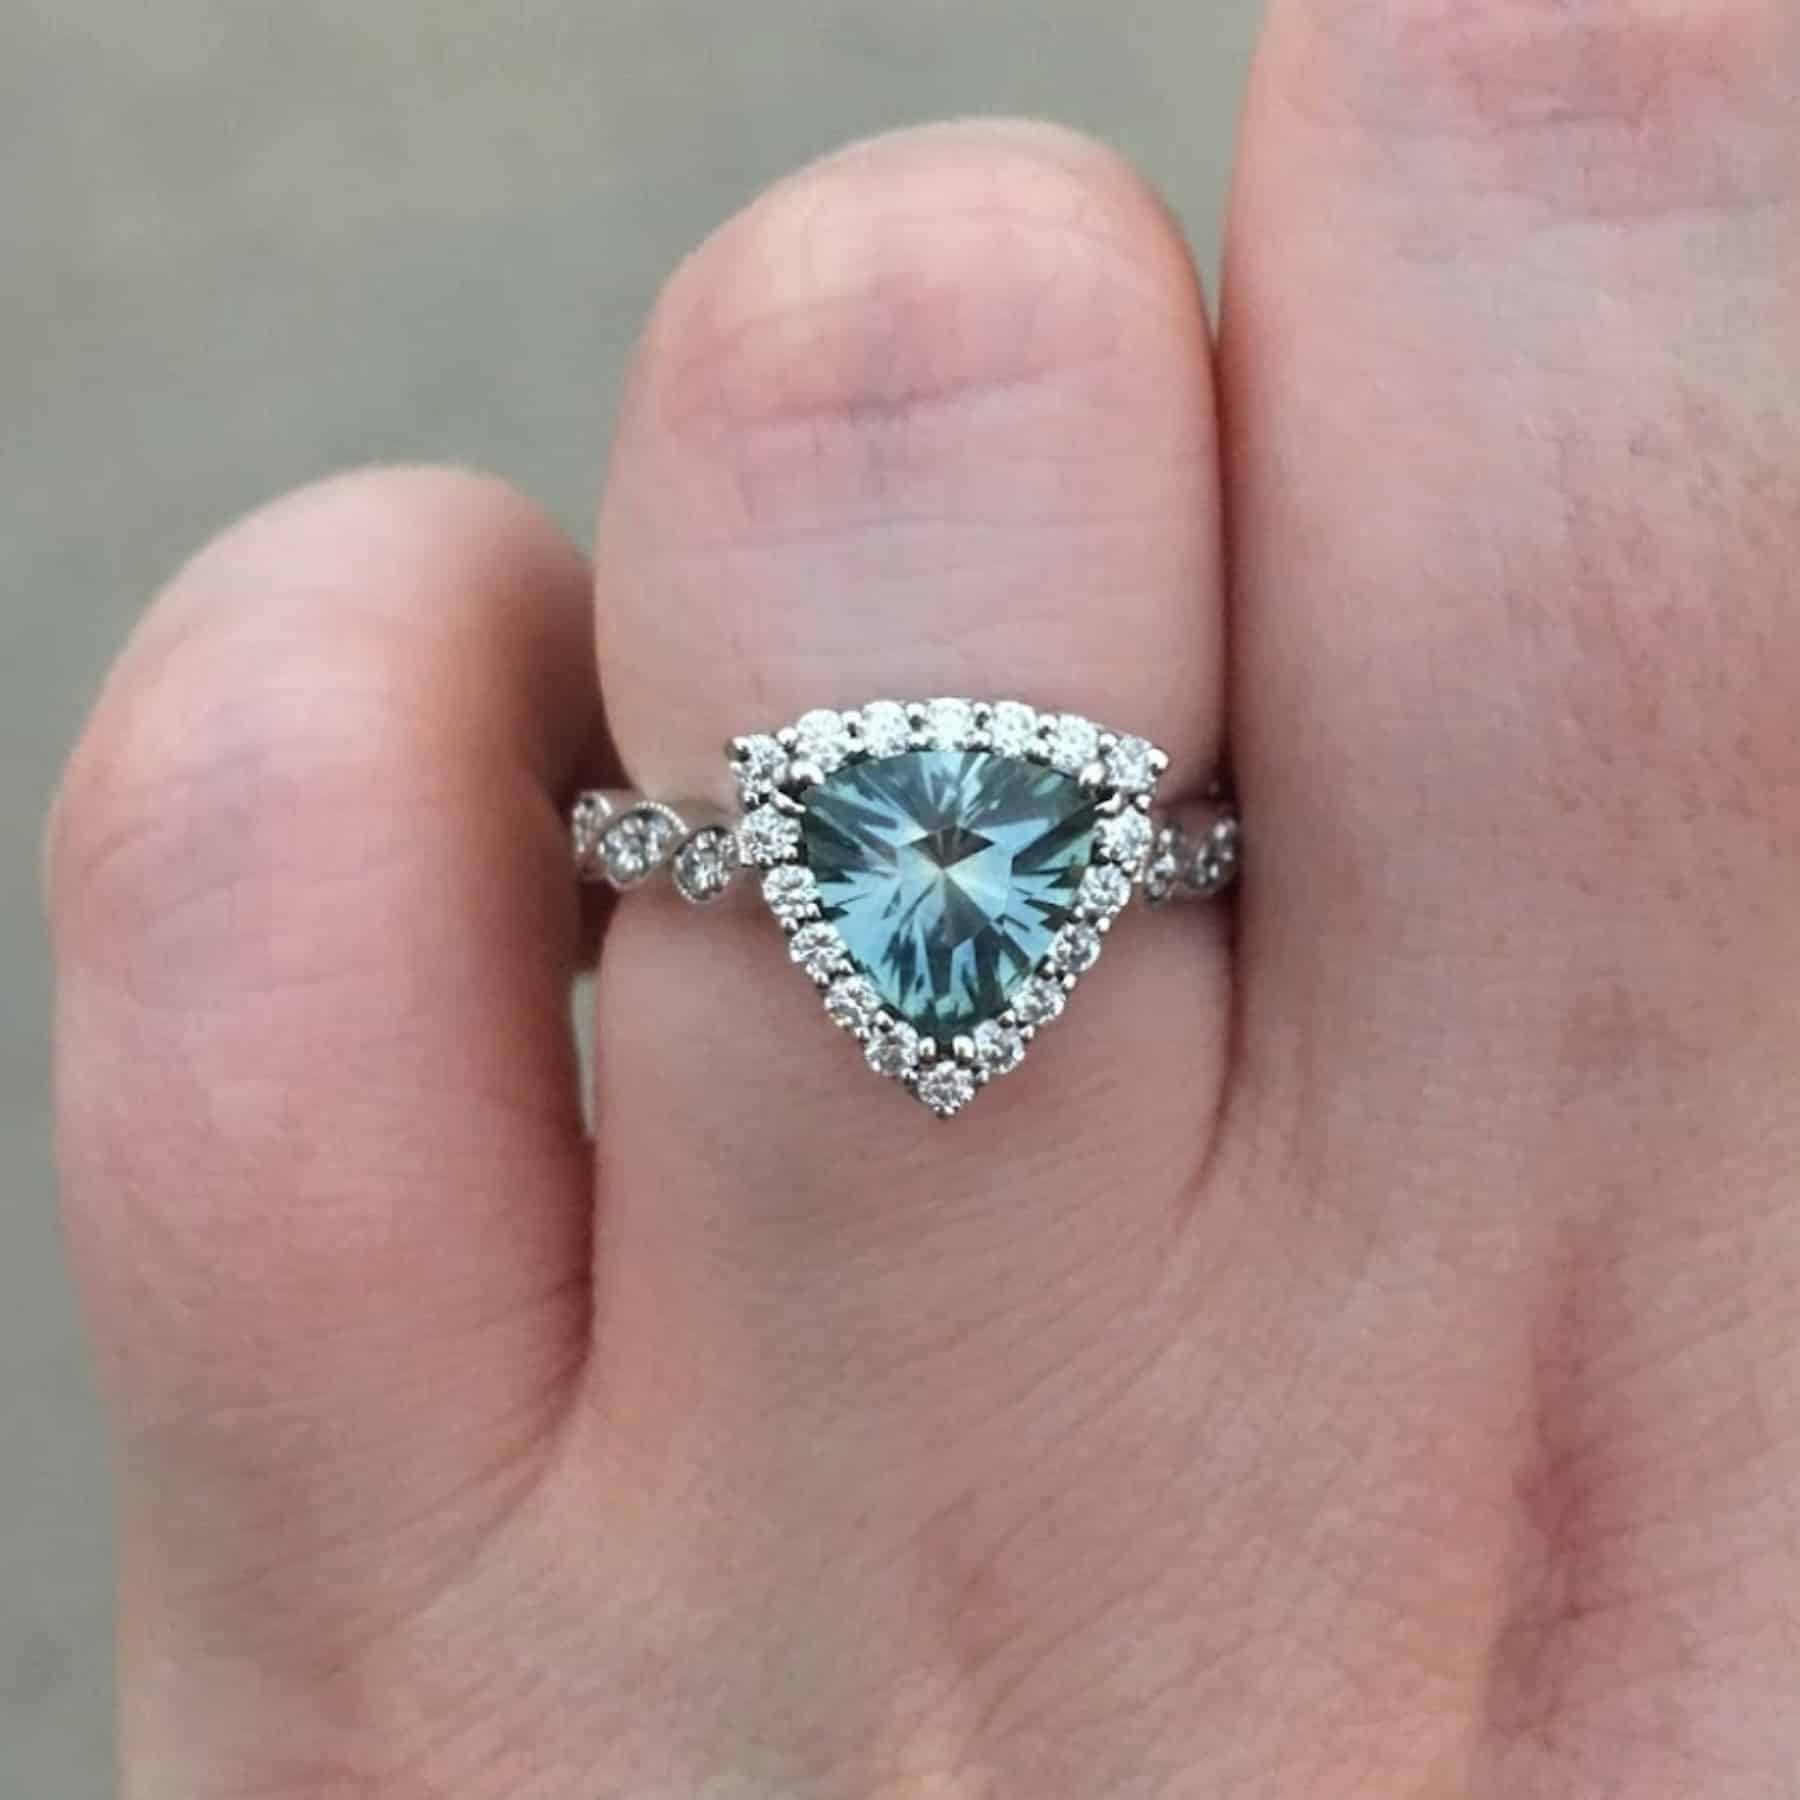 A photo from a customer review featuring a custom halo ring with twisted diamond-accented band and a large aqua trillion Montana sapphire